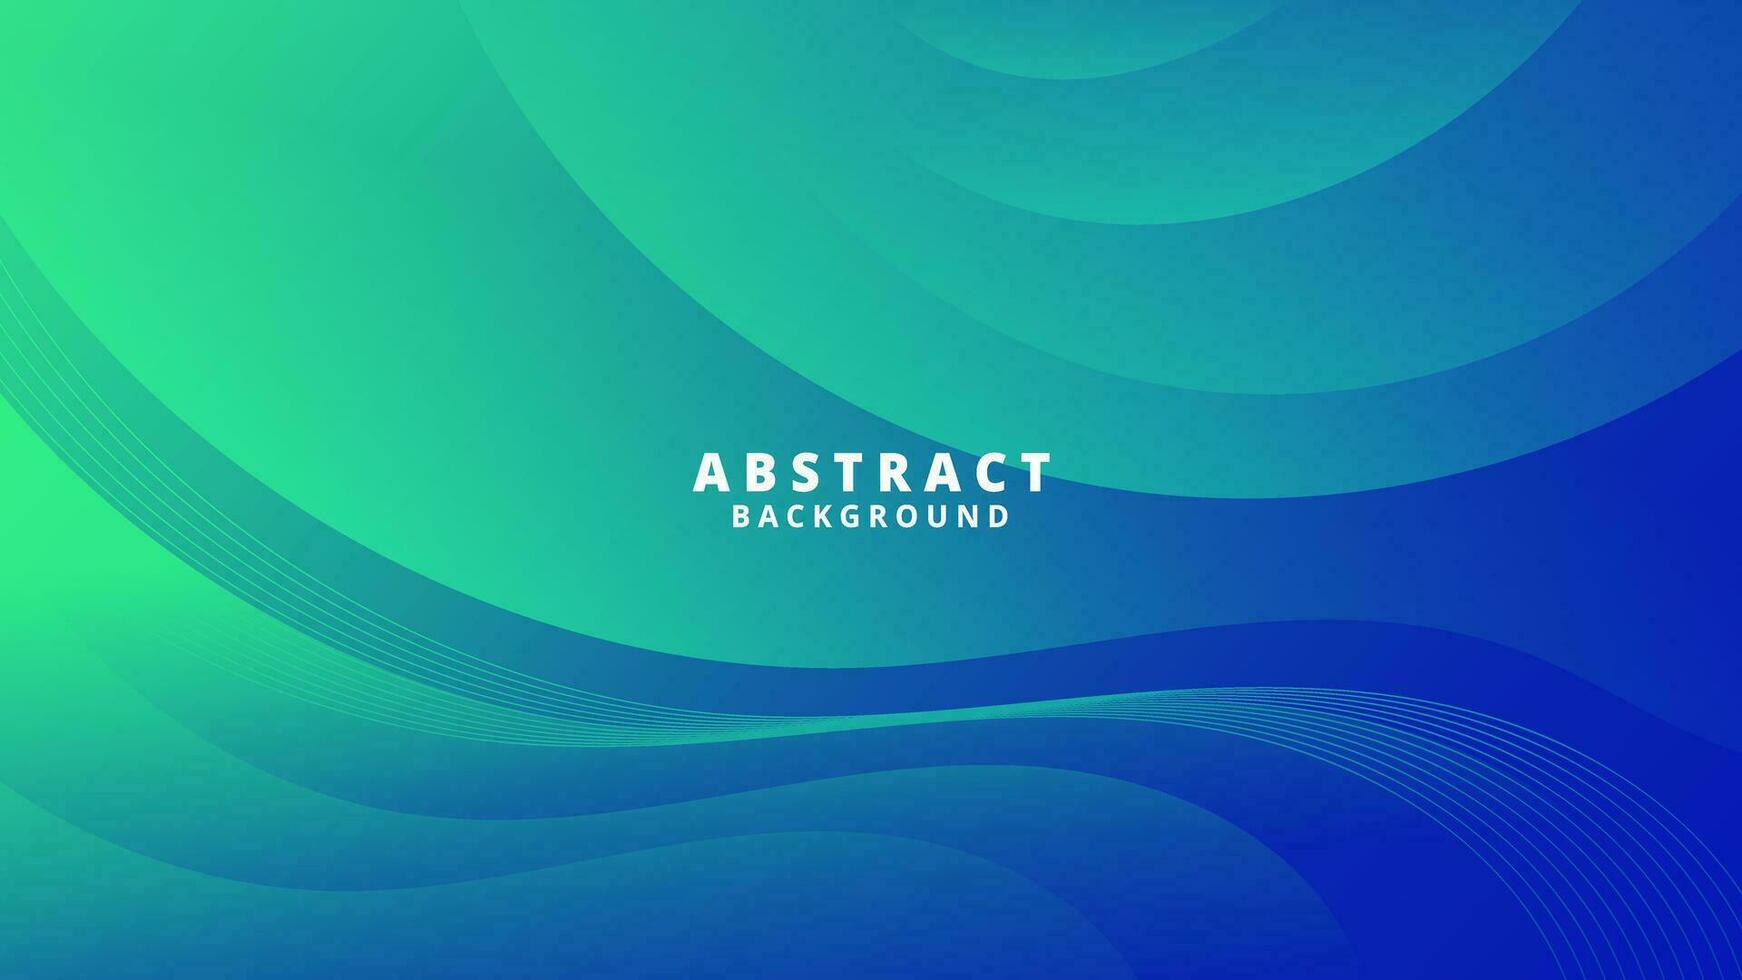 Abstract Green blue Background with Wavy Shapes. flowing and curvy shapes. This asset is suitable for website backgrounds, flyers, posters, and digital art projects. vector